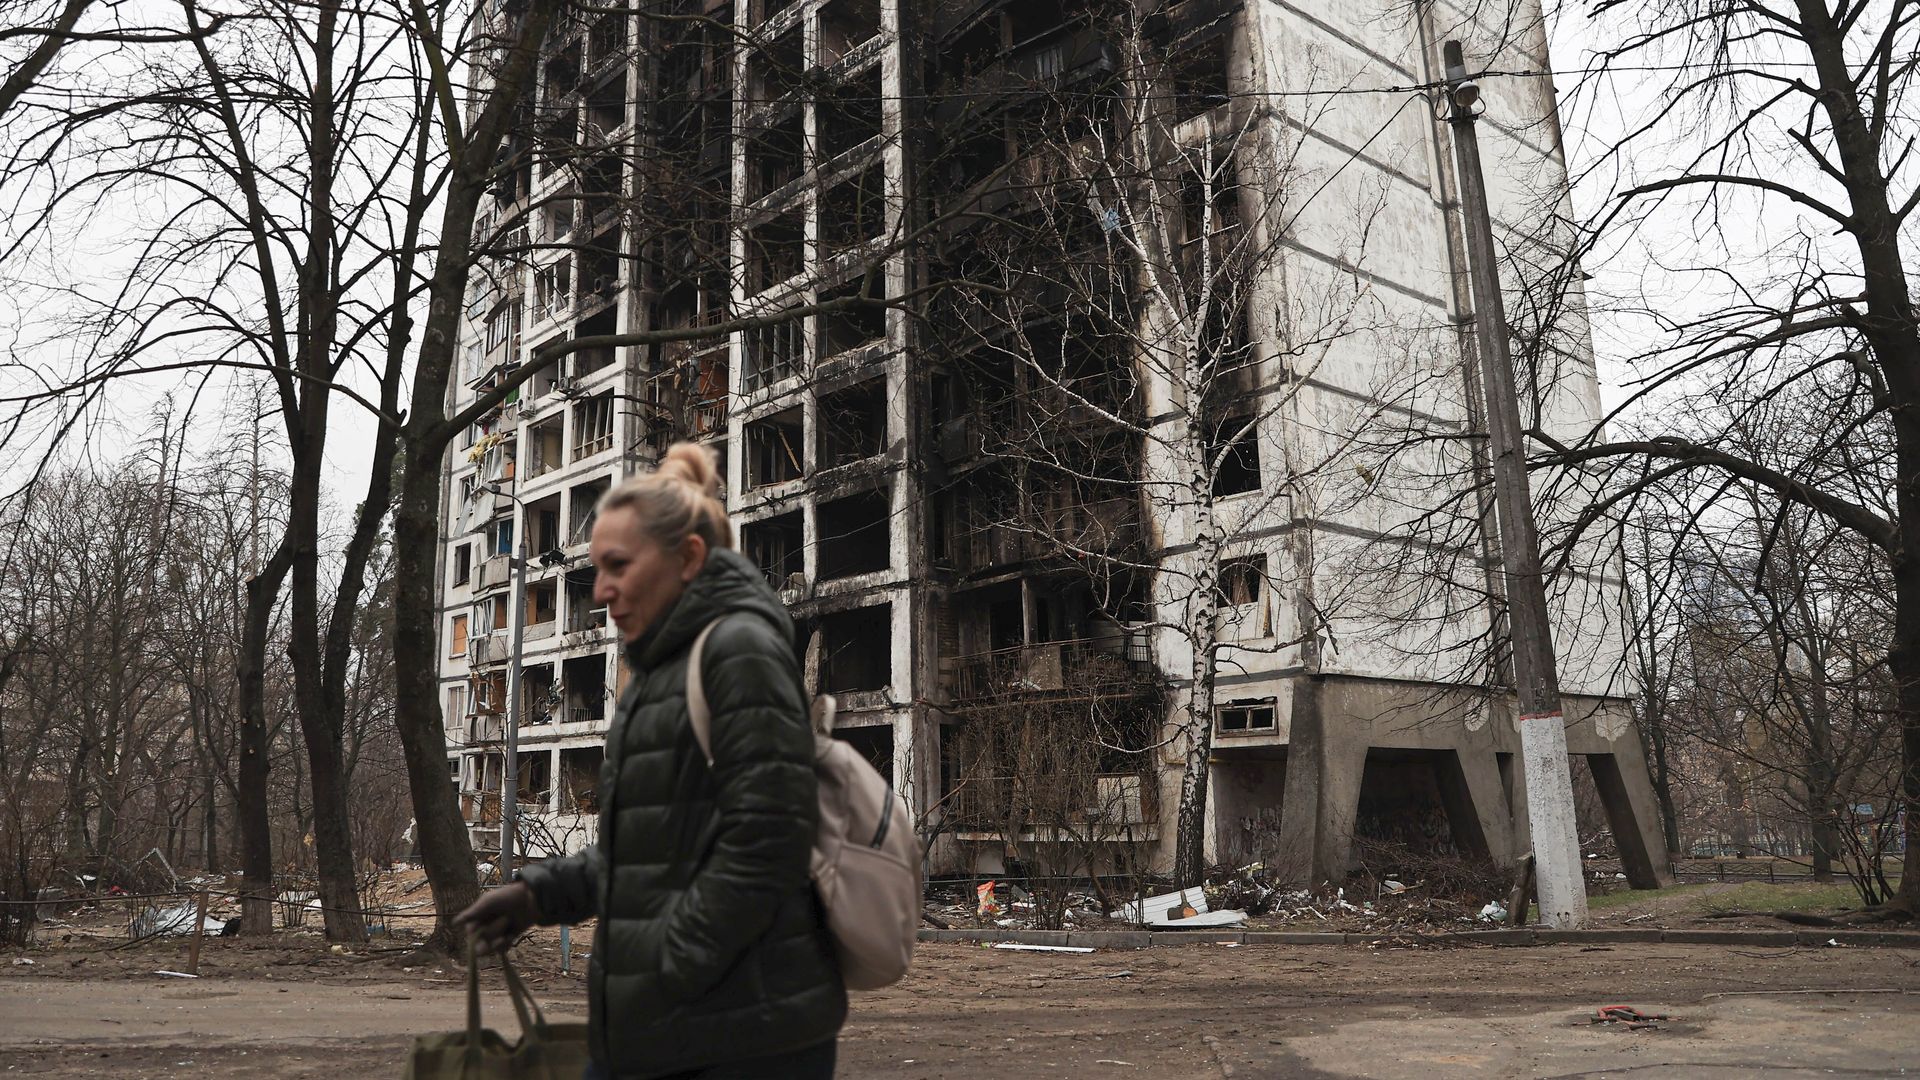 A person walking past a completely destroyed building in Kyiv on March 30 after Russian shelling on parts of the city.